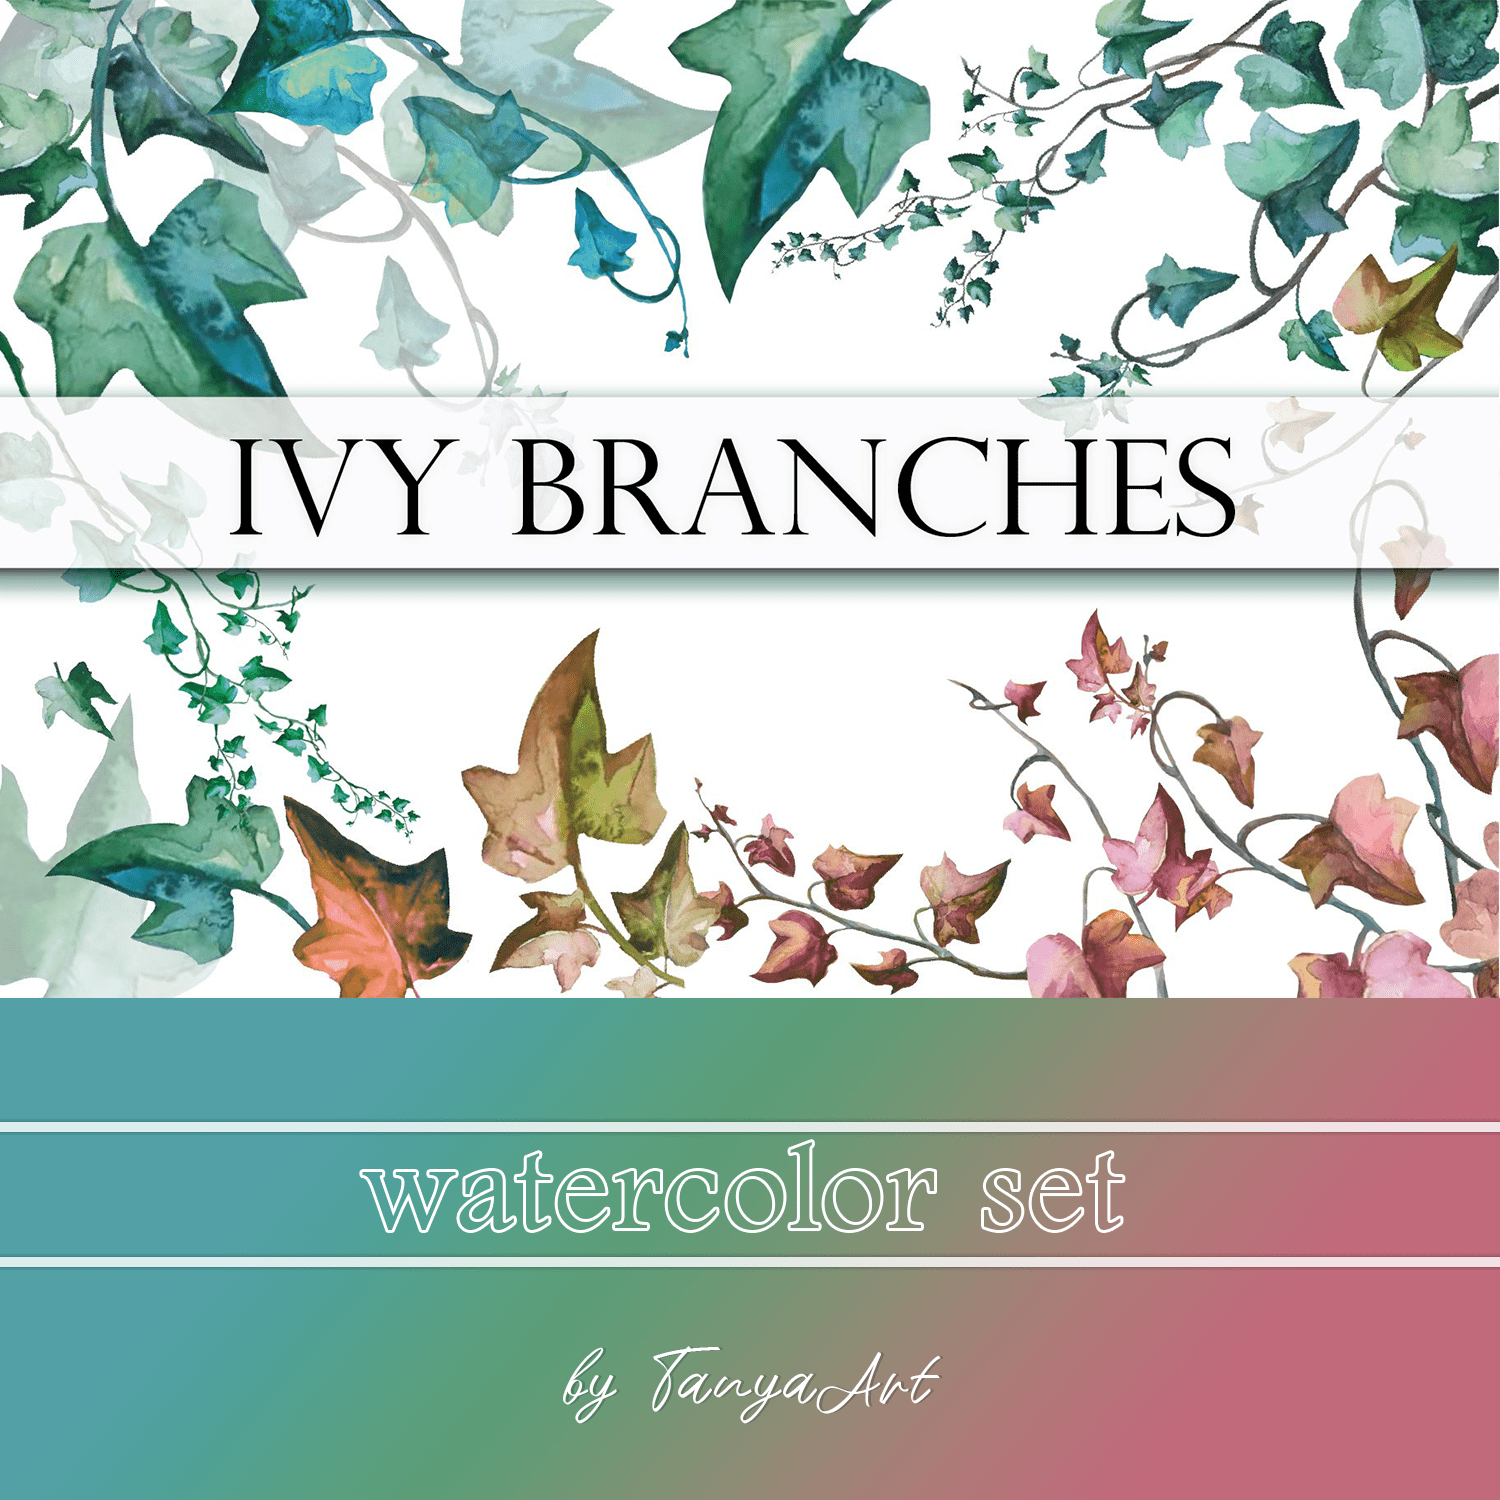 ivy branches watercolor set cover.